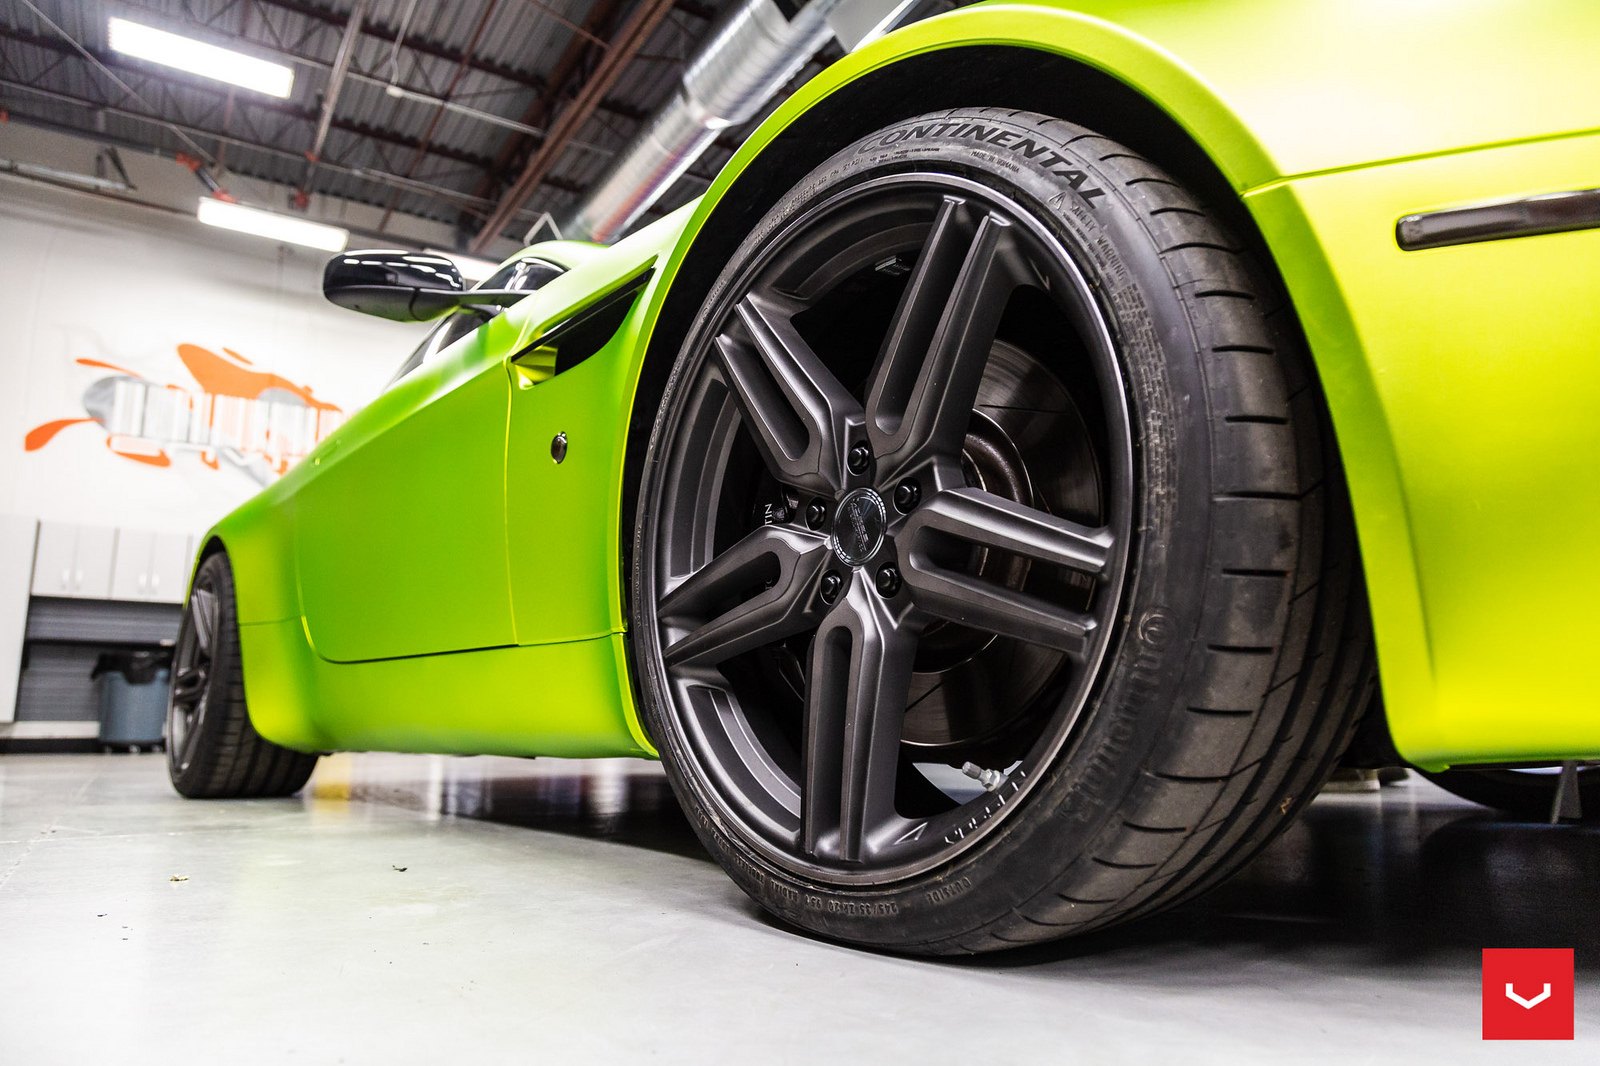 Continental Tires on Lime Green Aston Martin Vantage - Photo by Vossen